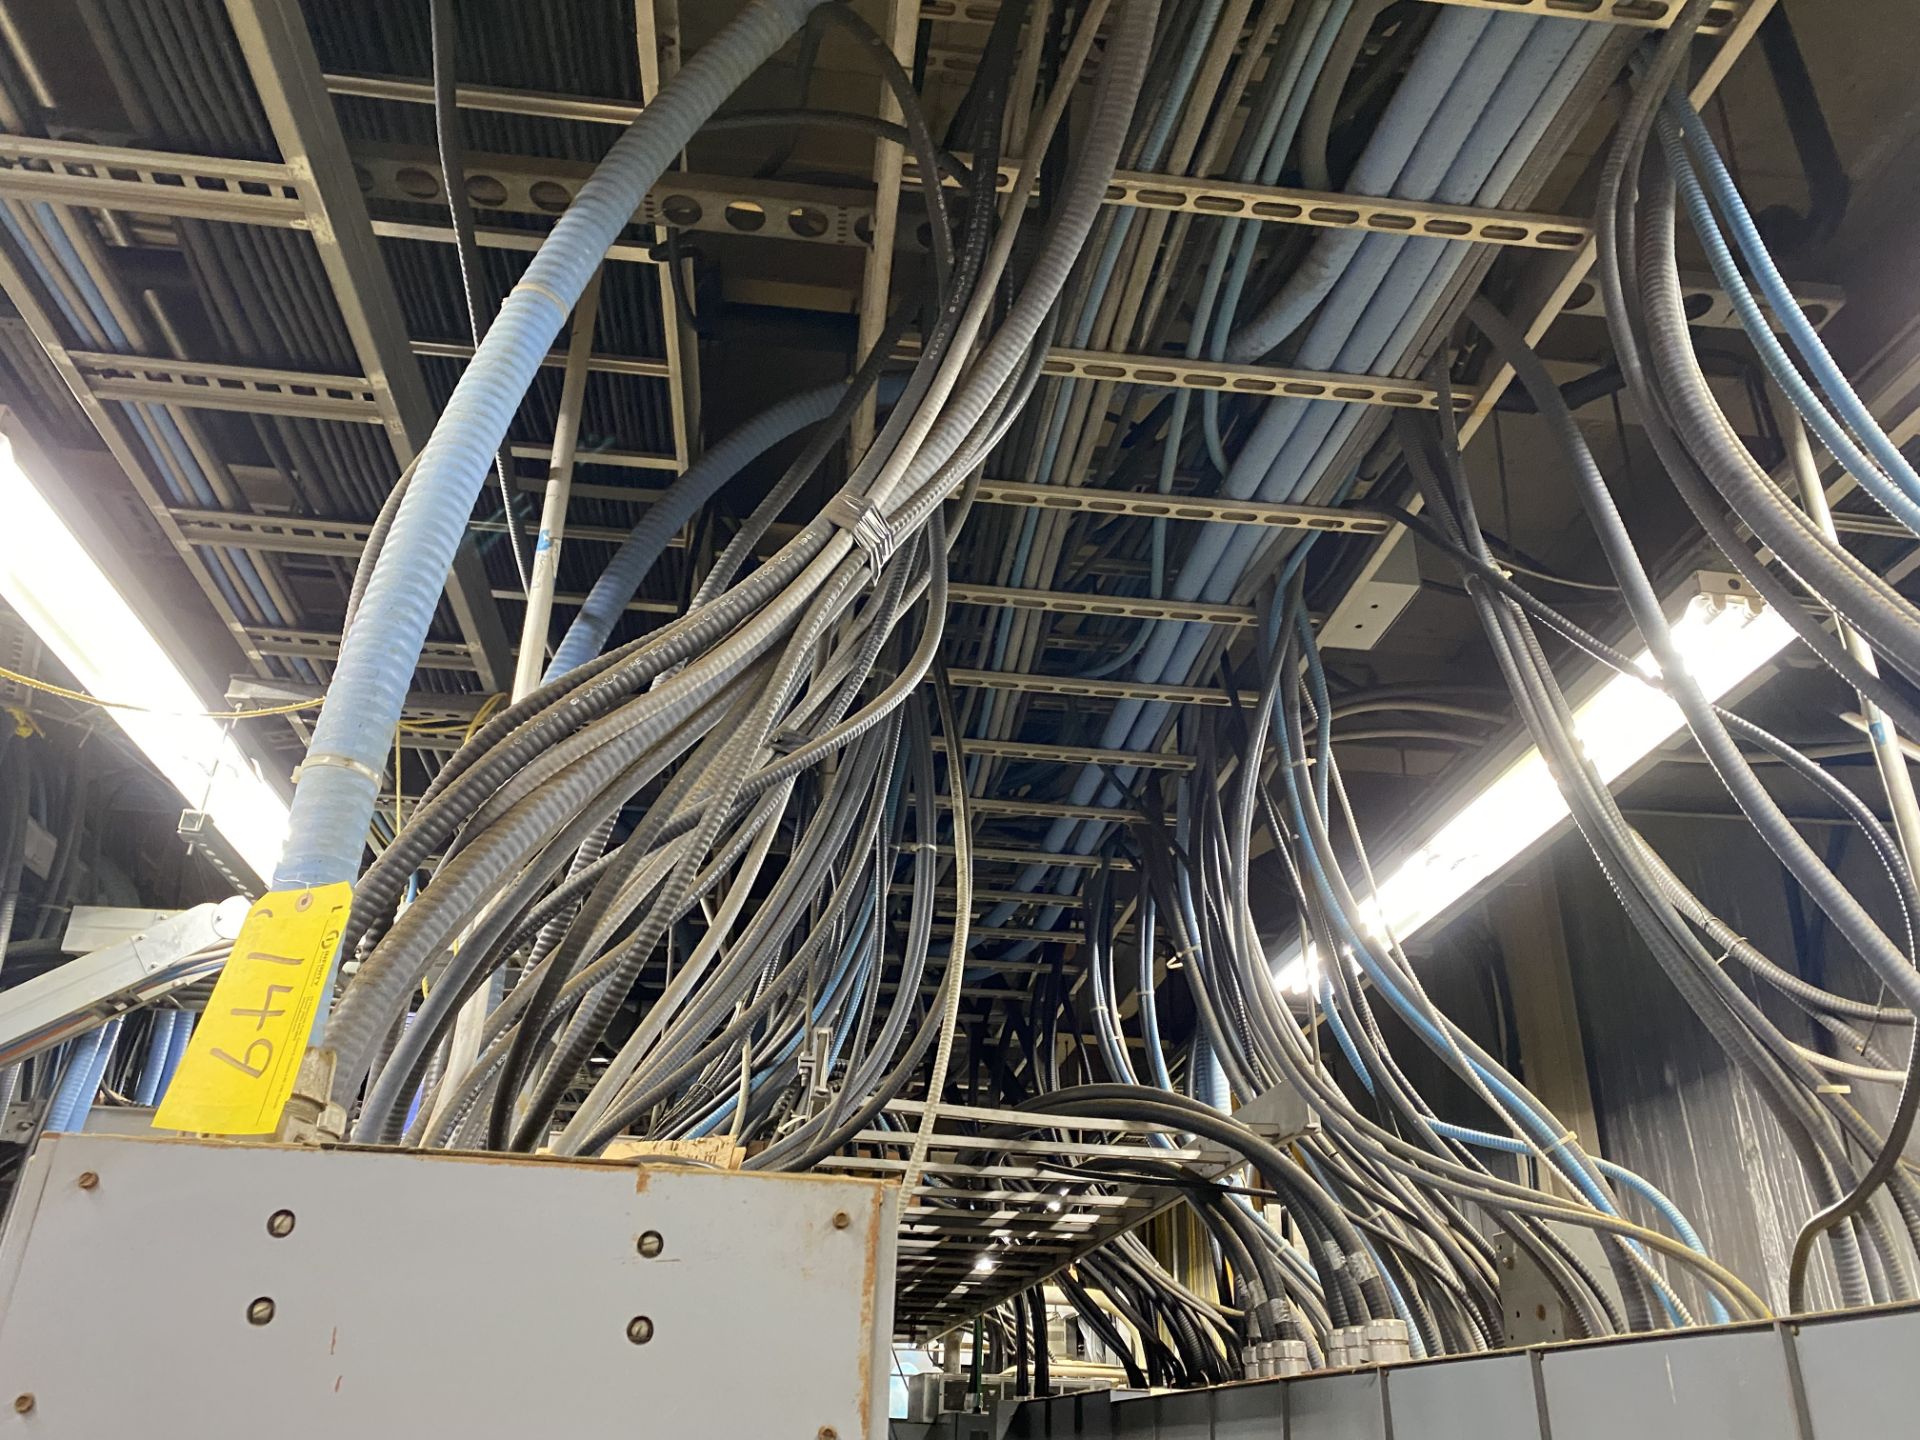 LOT OF ALL MACHINERY RELATED WIRE / ELECTRICAL CABLES IN PLANT, MULTIPLE RUNS (NO ELECTRICAL PANELS, - Image 3 of 15